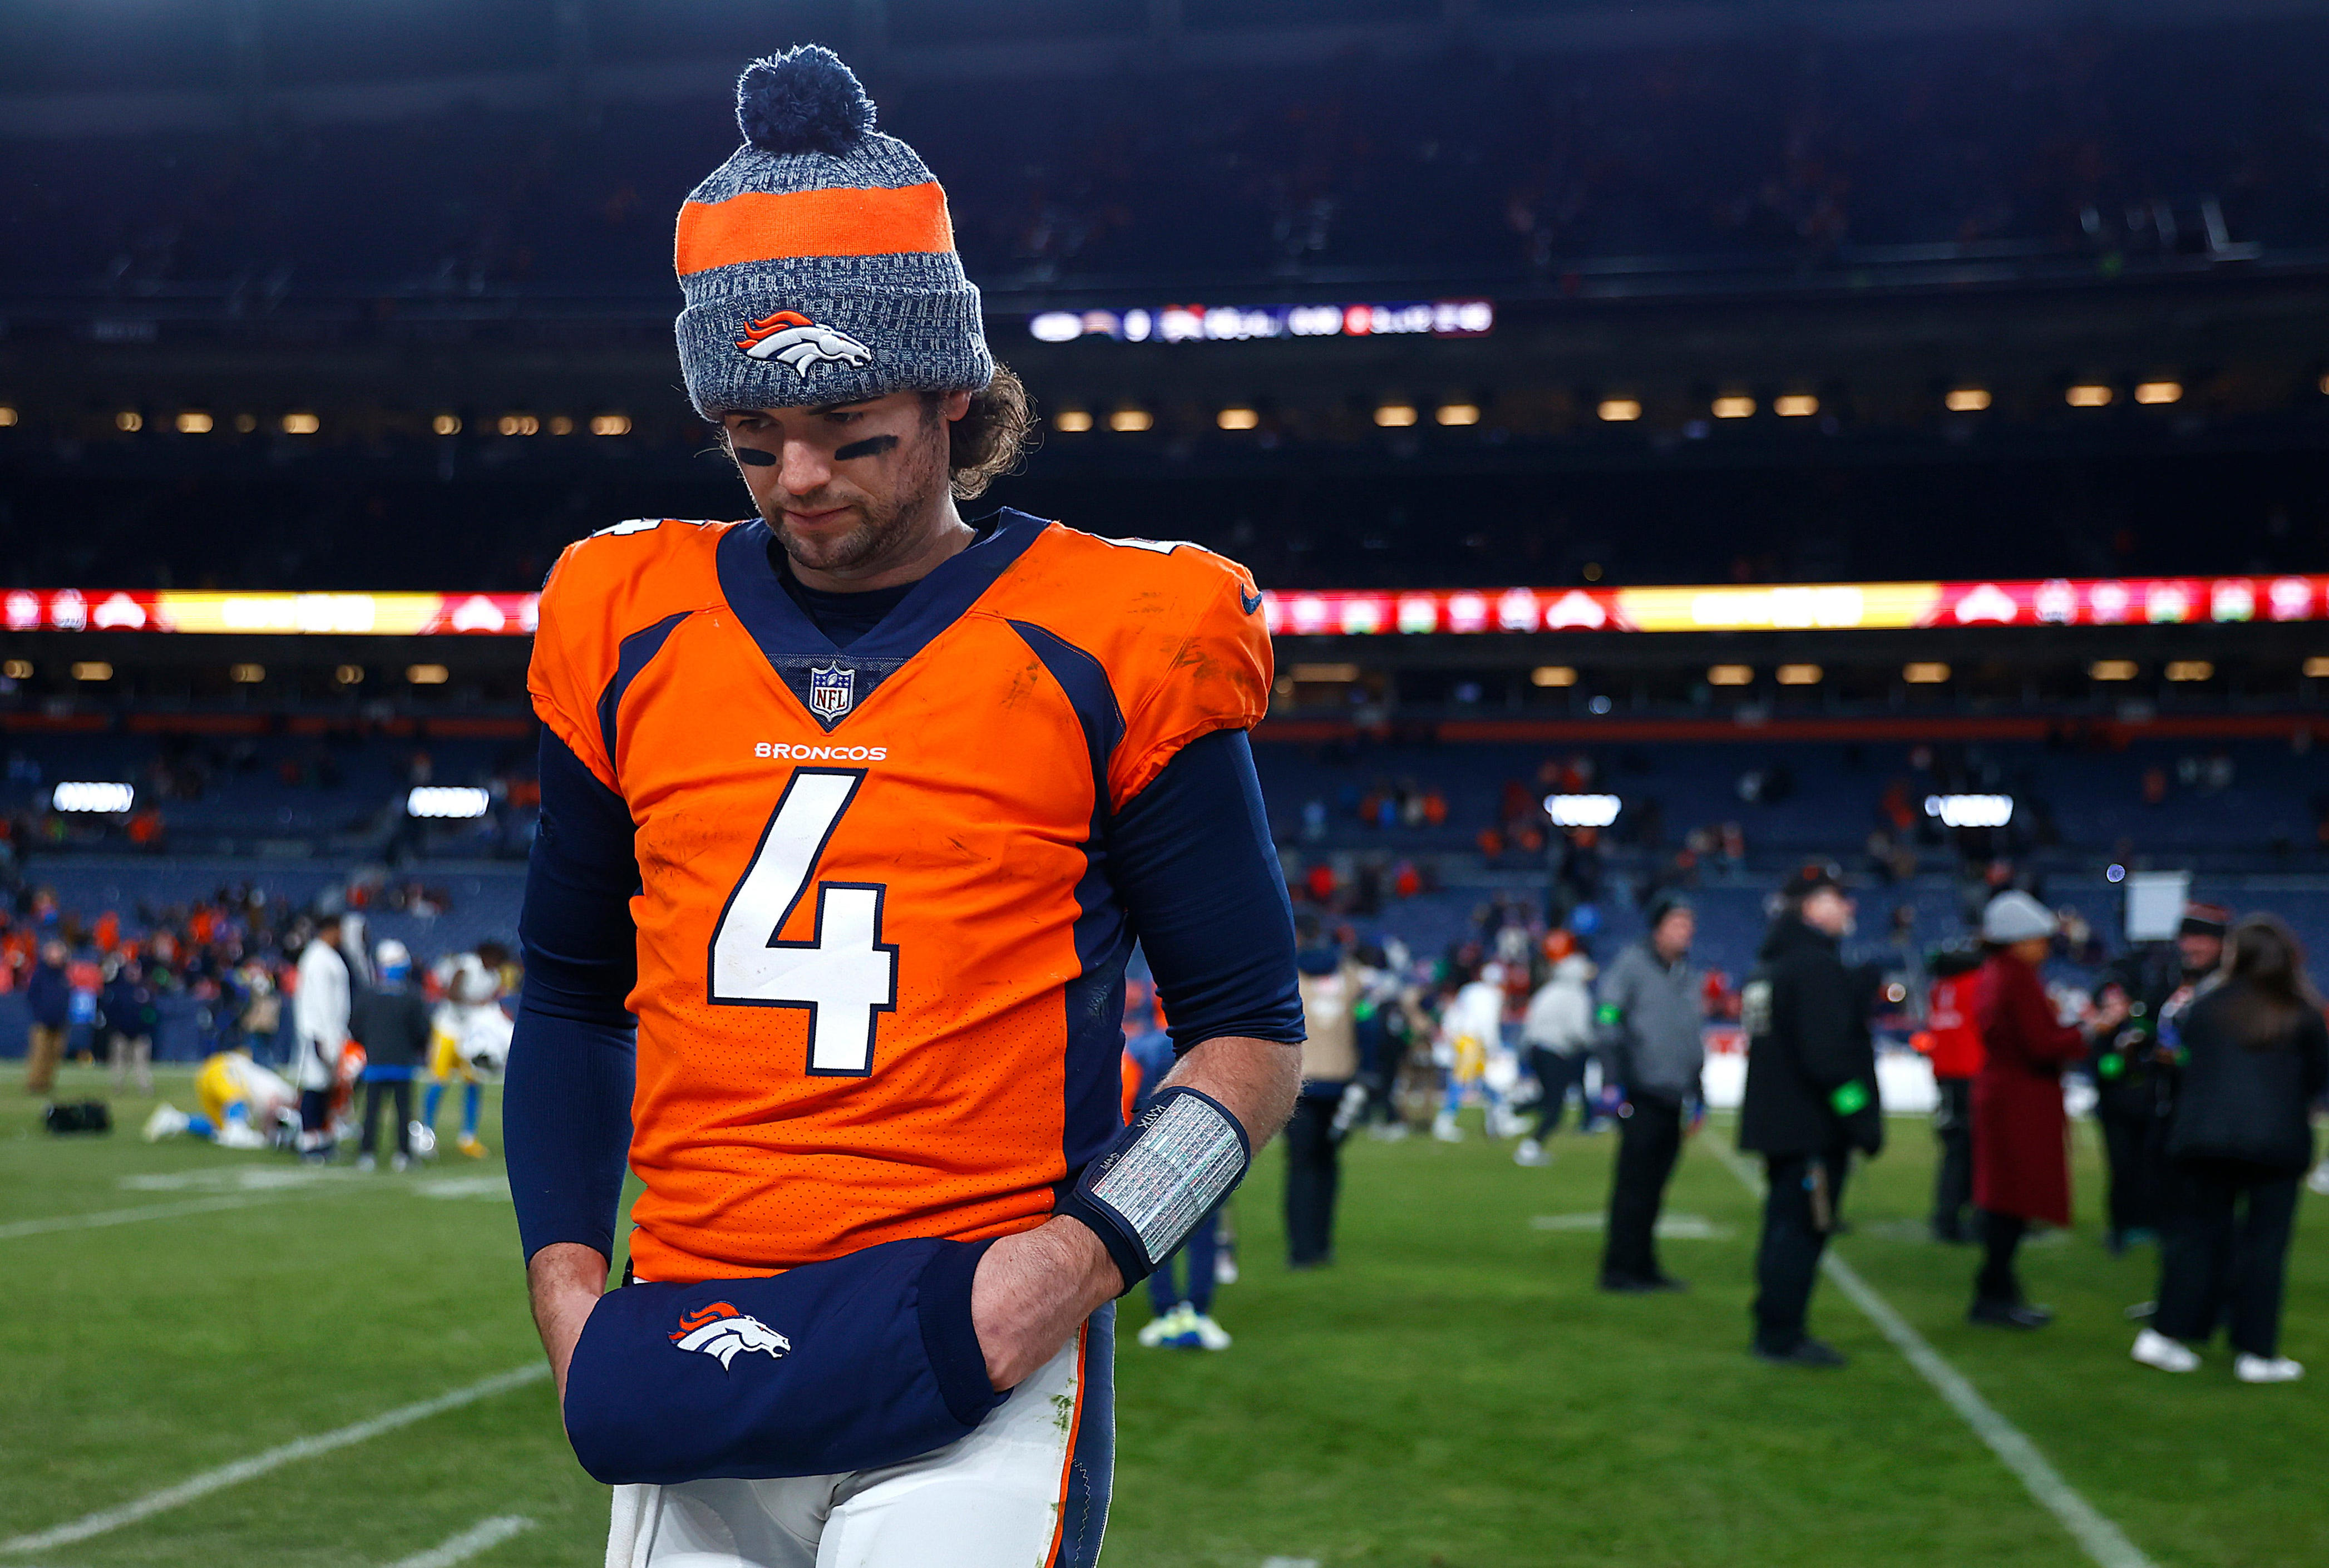 will the broncos cut a quarterback this summer?